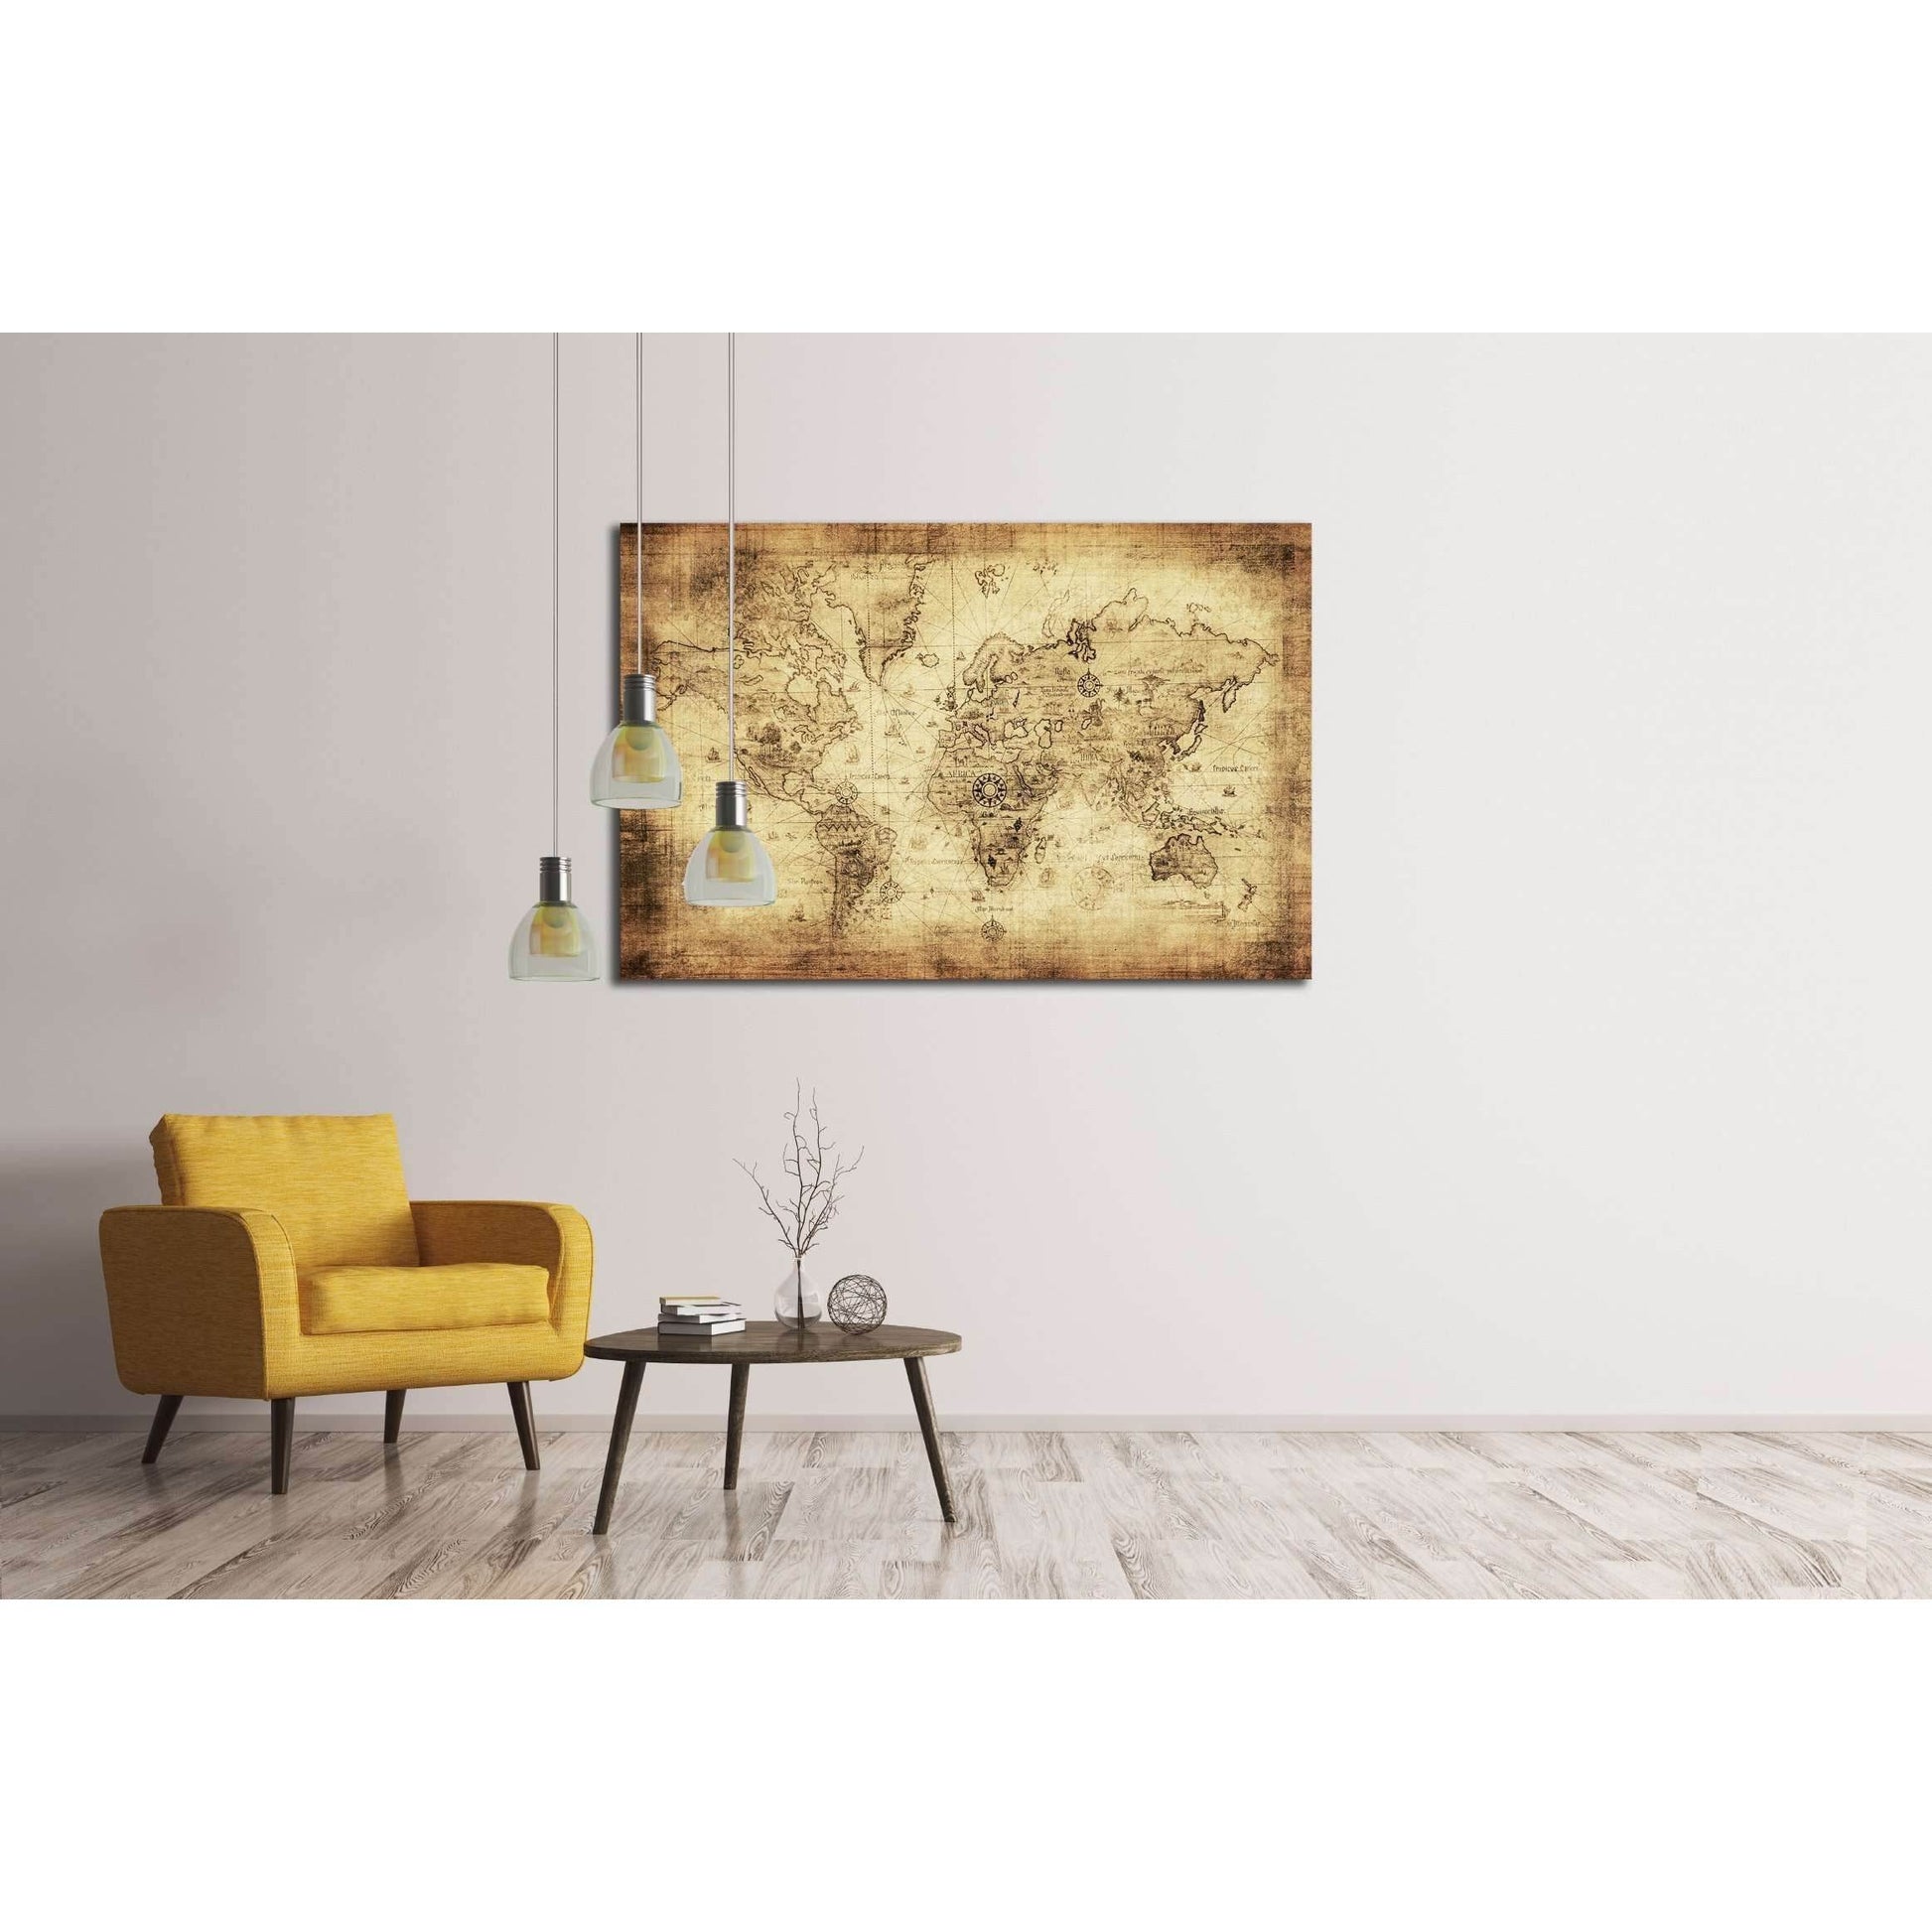 Ancient World Map Canvas ArtworkDecorate your walls with a stunning Ancient Map Canvas Art Print from the world's largest art gallery. Choose from thousands of World Map artworks with various sizing options. Choose your perfect art print to complete your